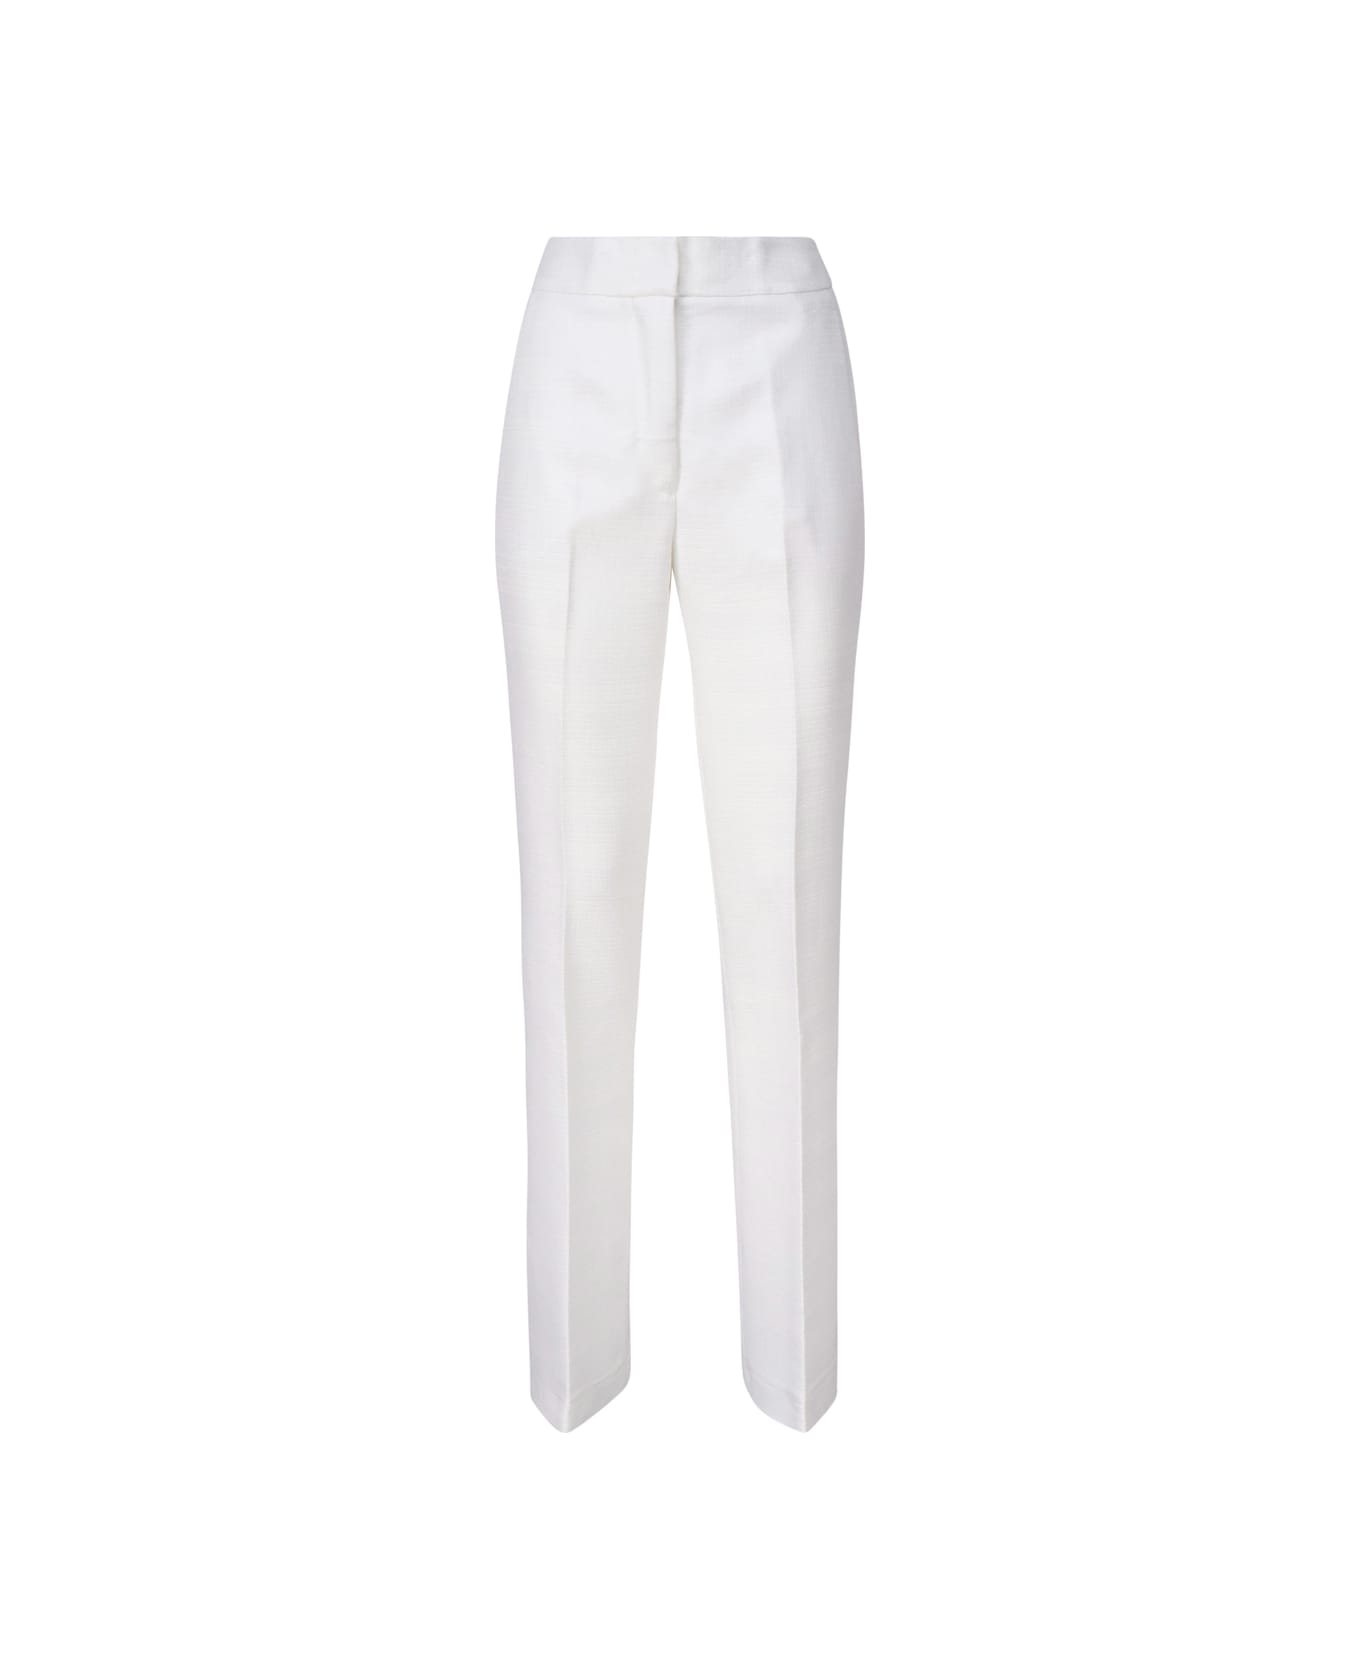 Genny Viscose Tailored Pants - White ボトムス